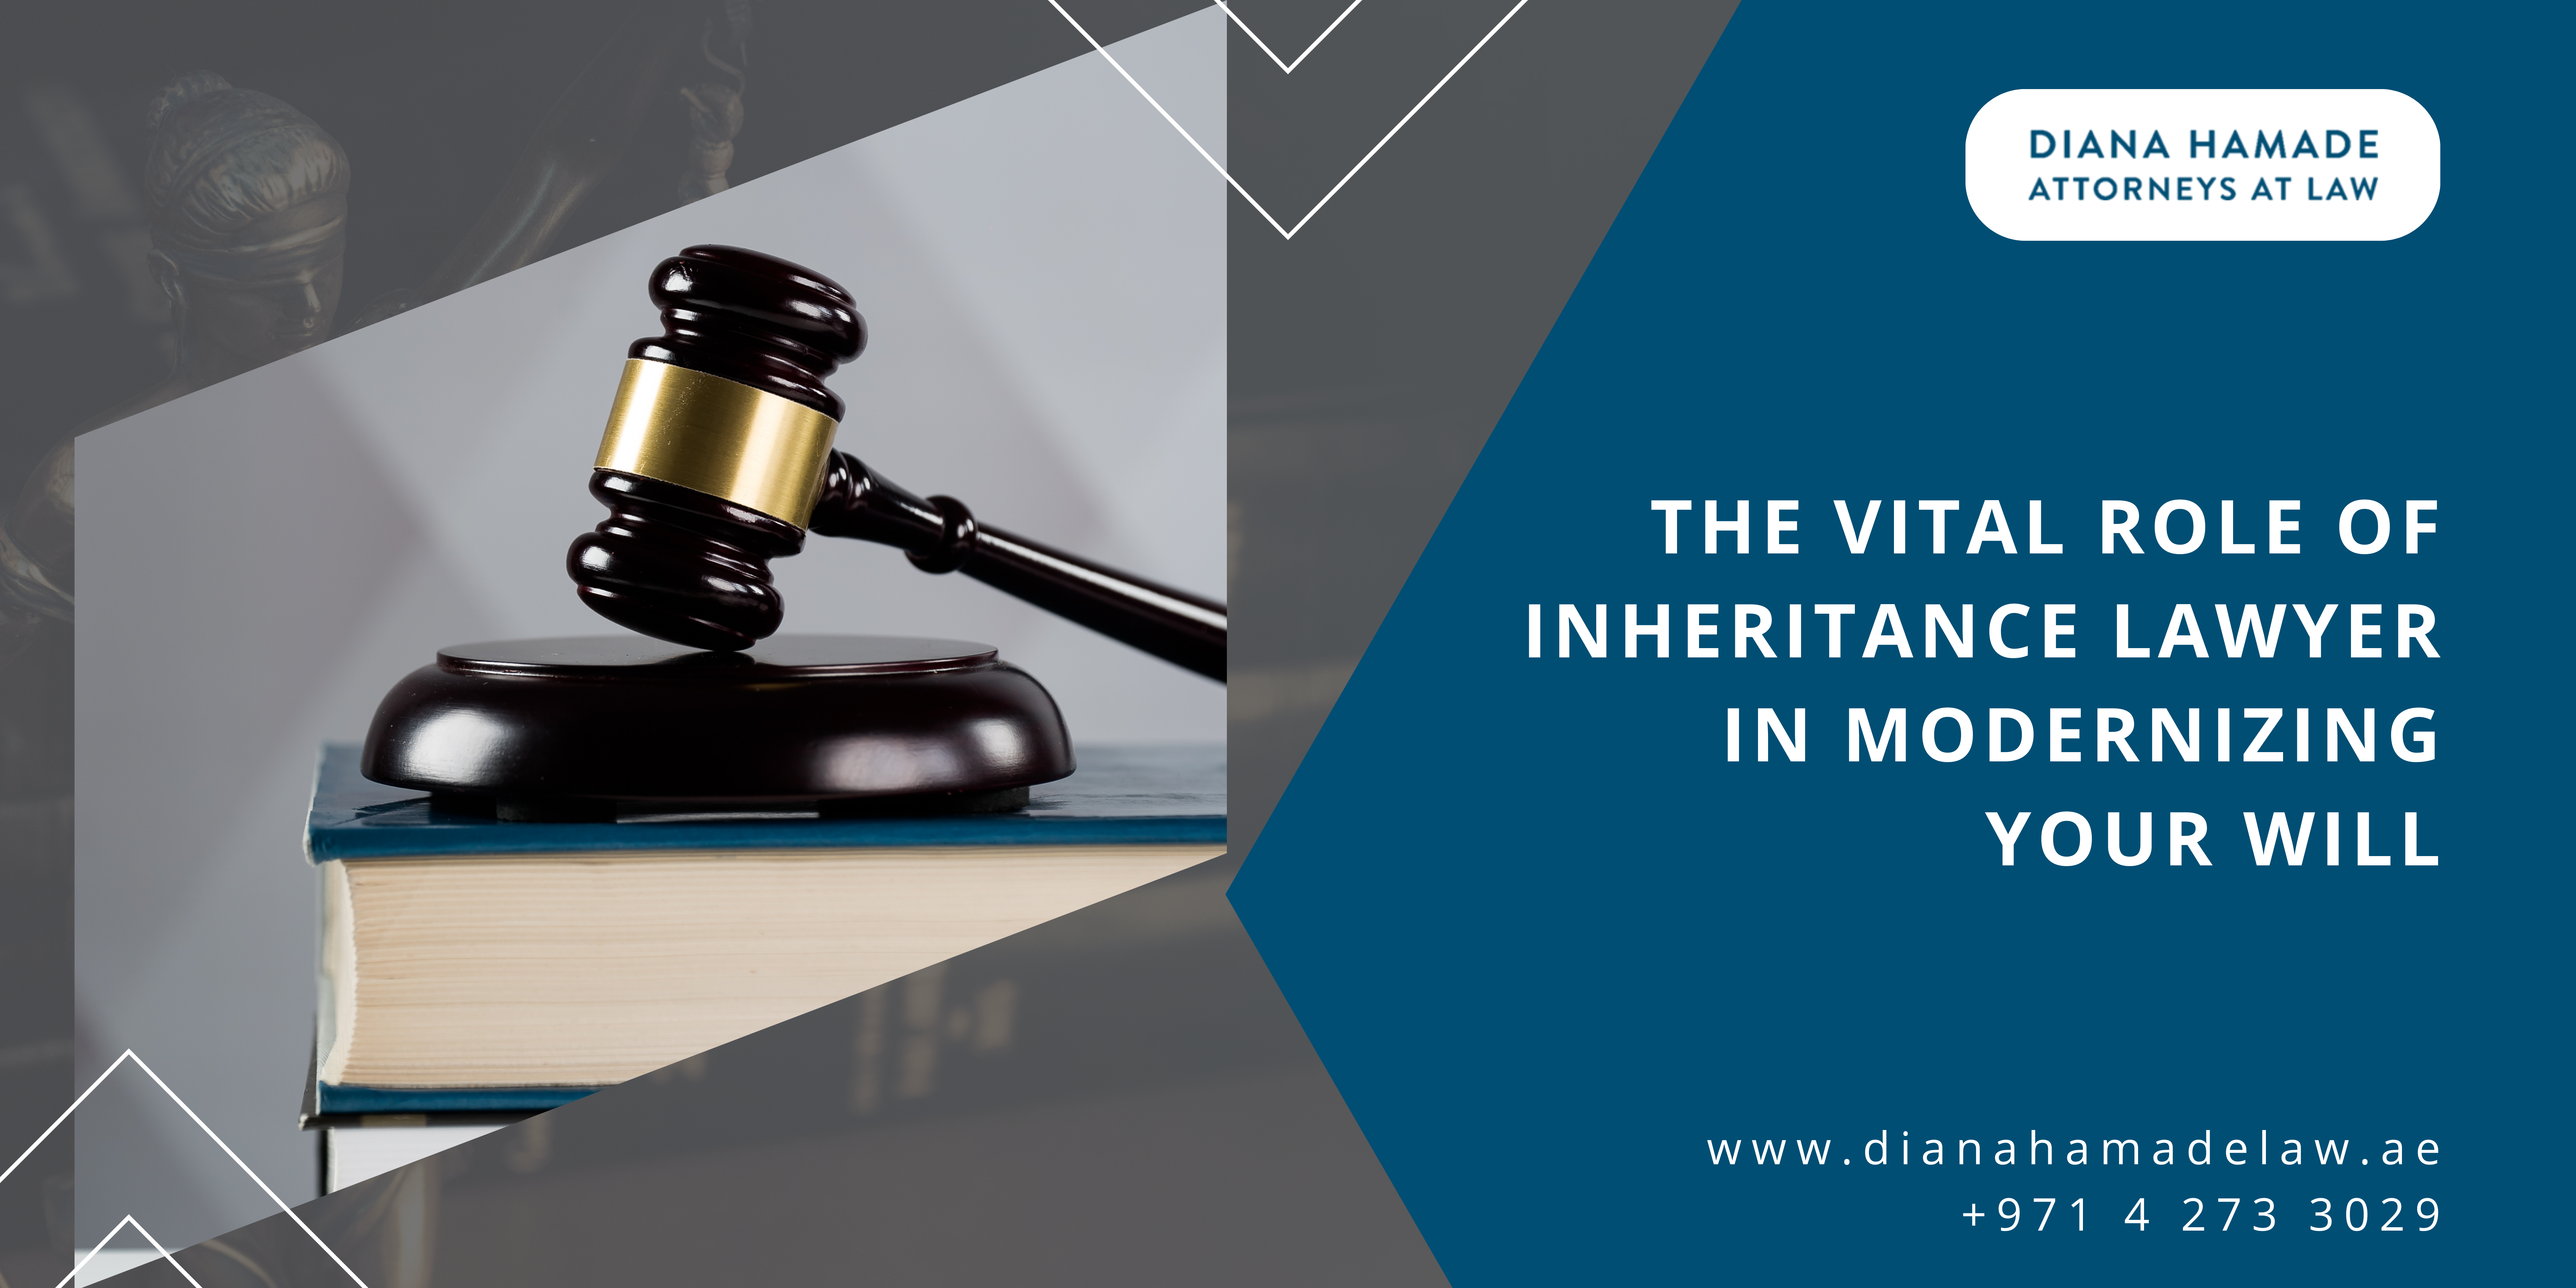 The Vital Role of Inheritance Lawyer in Modernizing Your Will